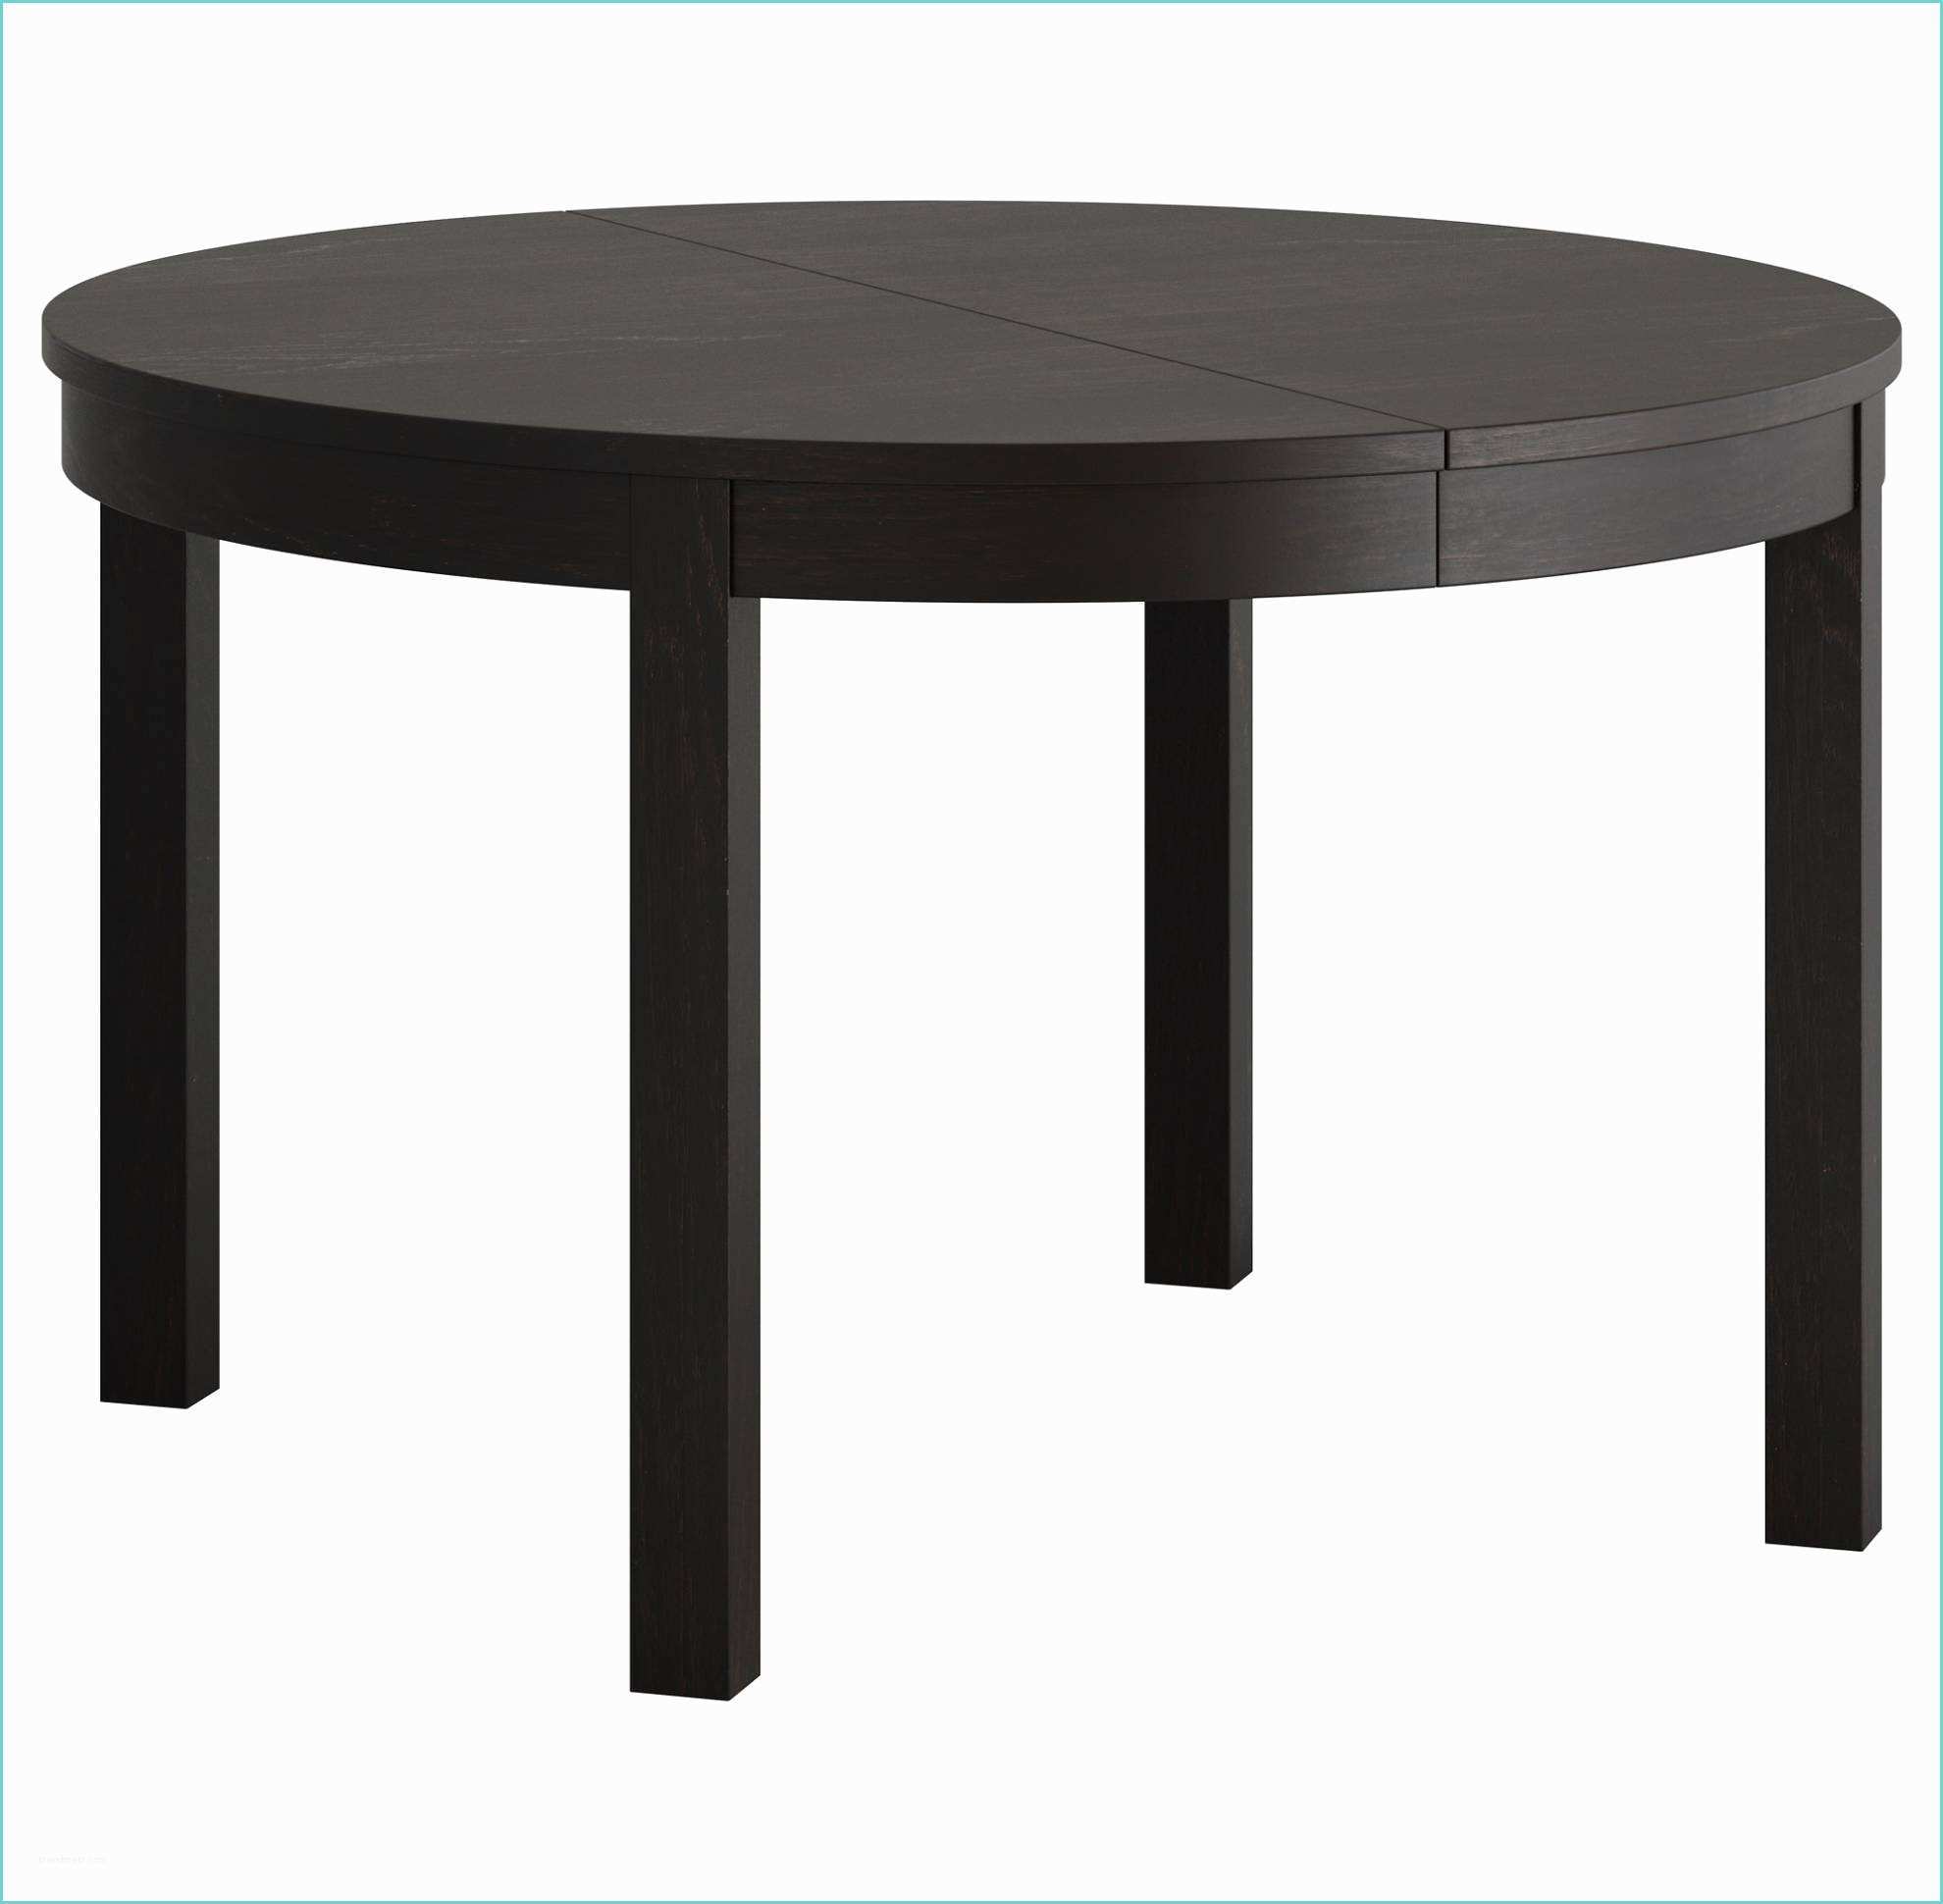 Table Ronde Ikea Bjursta 15 Collection Of Round Dining Table